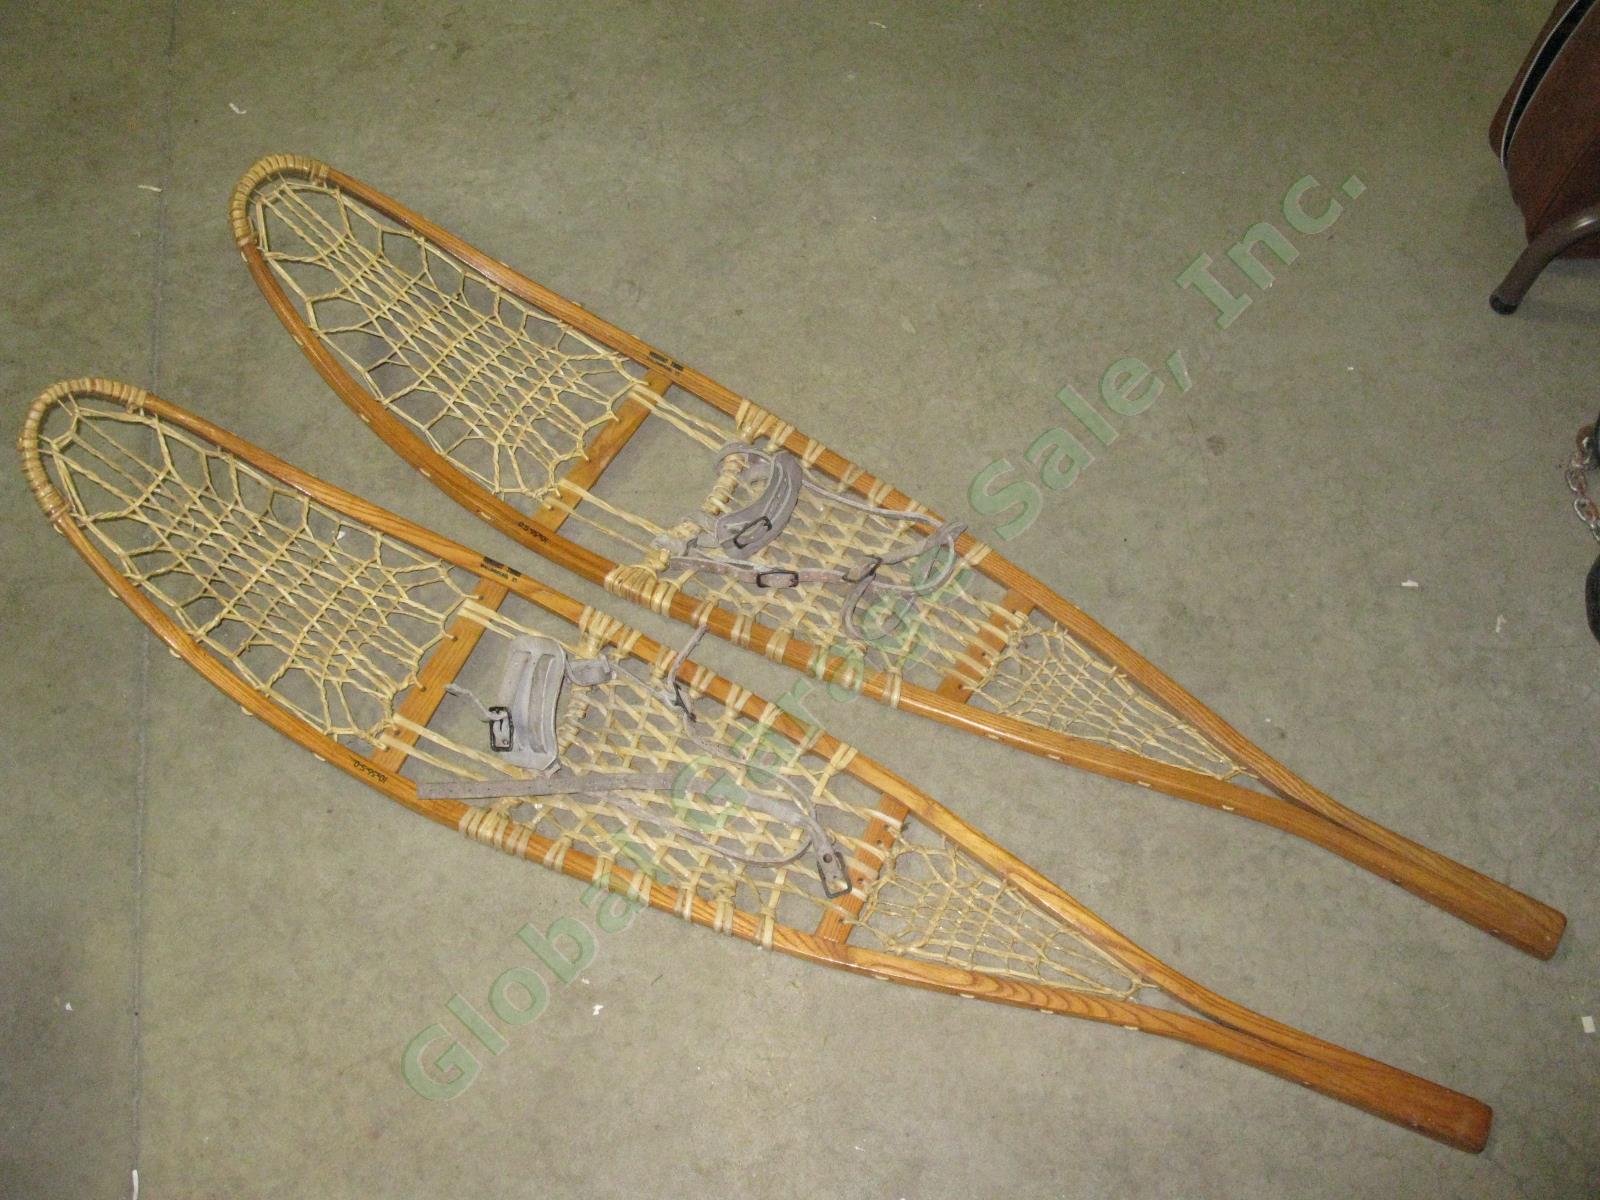 Vtg Wood Wooden Vermont Made Tubbs Snowshoes 10x56-S-0 w/Bindings Exc Cond NR!